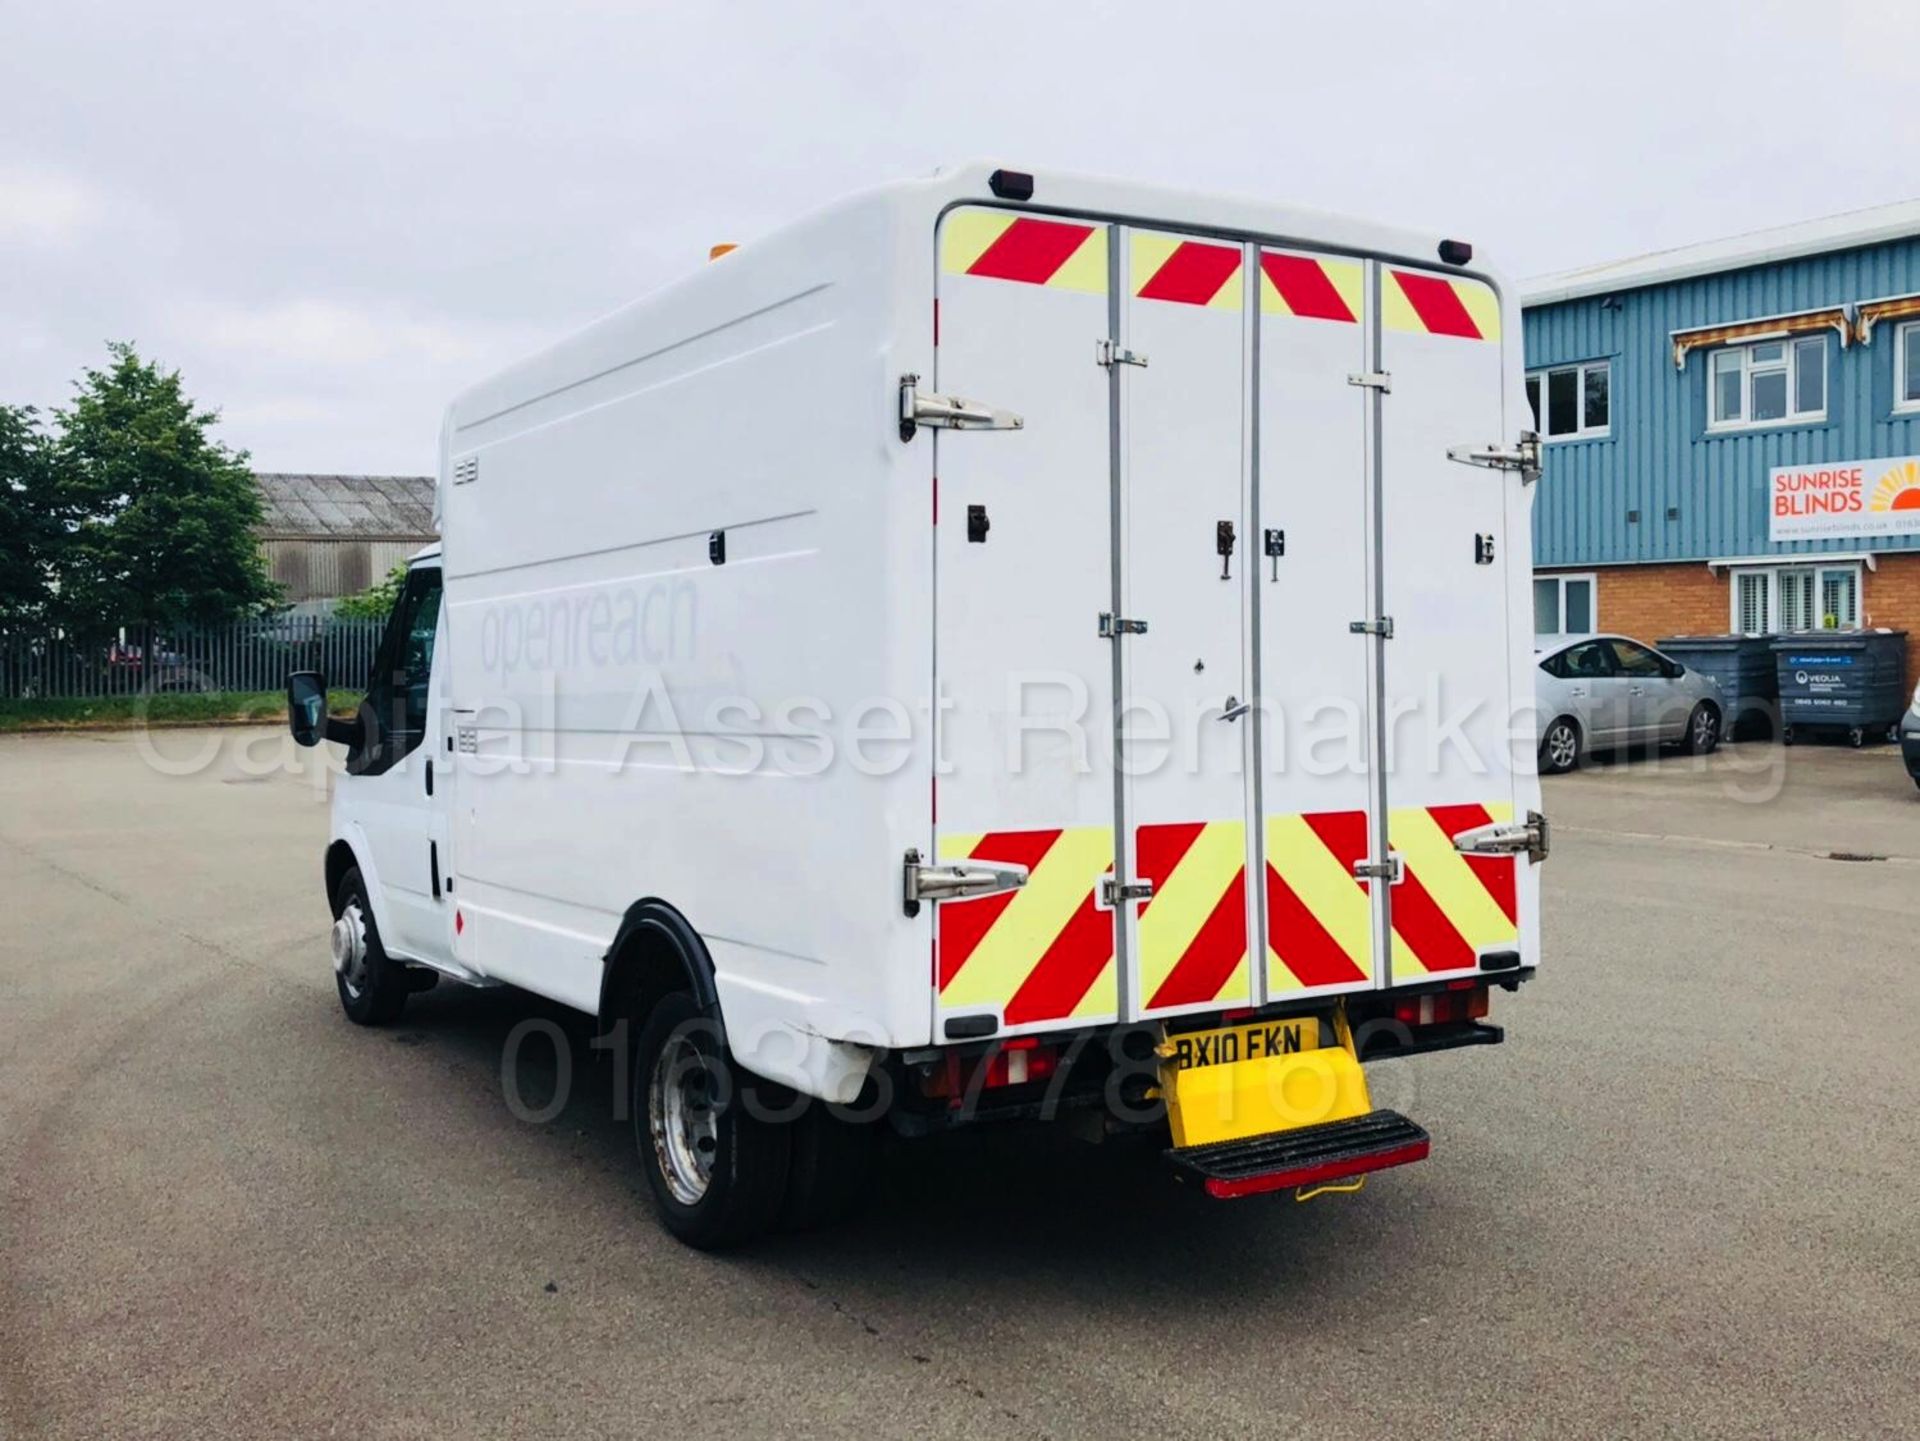 (On Sale) FORD TRANSIT 100 350 'BOX / LUTON VAN' (2010) '2.4 TDCI - 100 BHP' (1 COMPANY OWNER) - Image 15 of 29